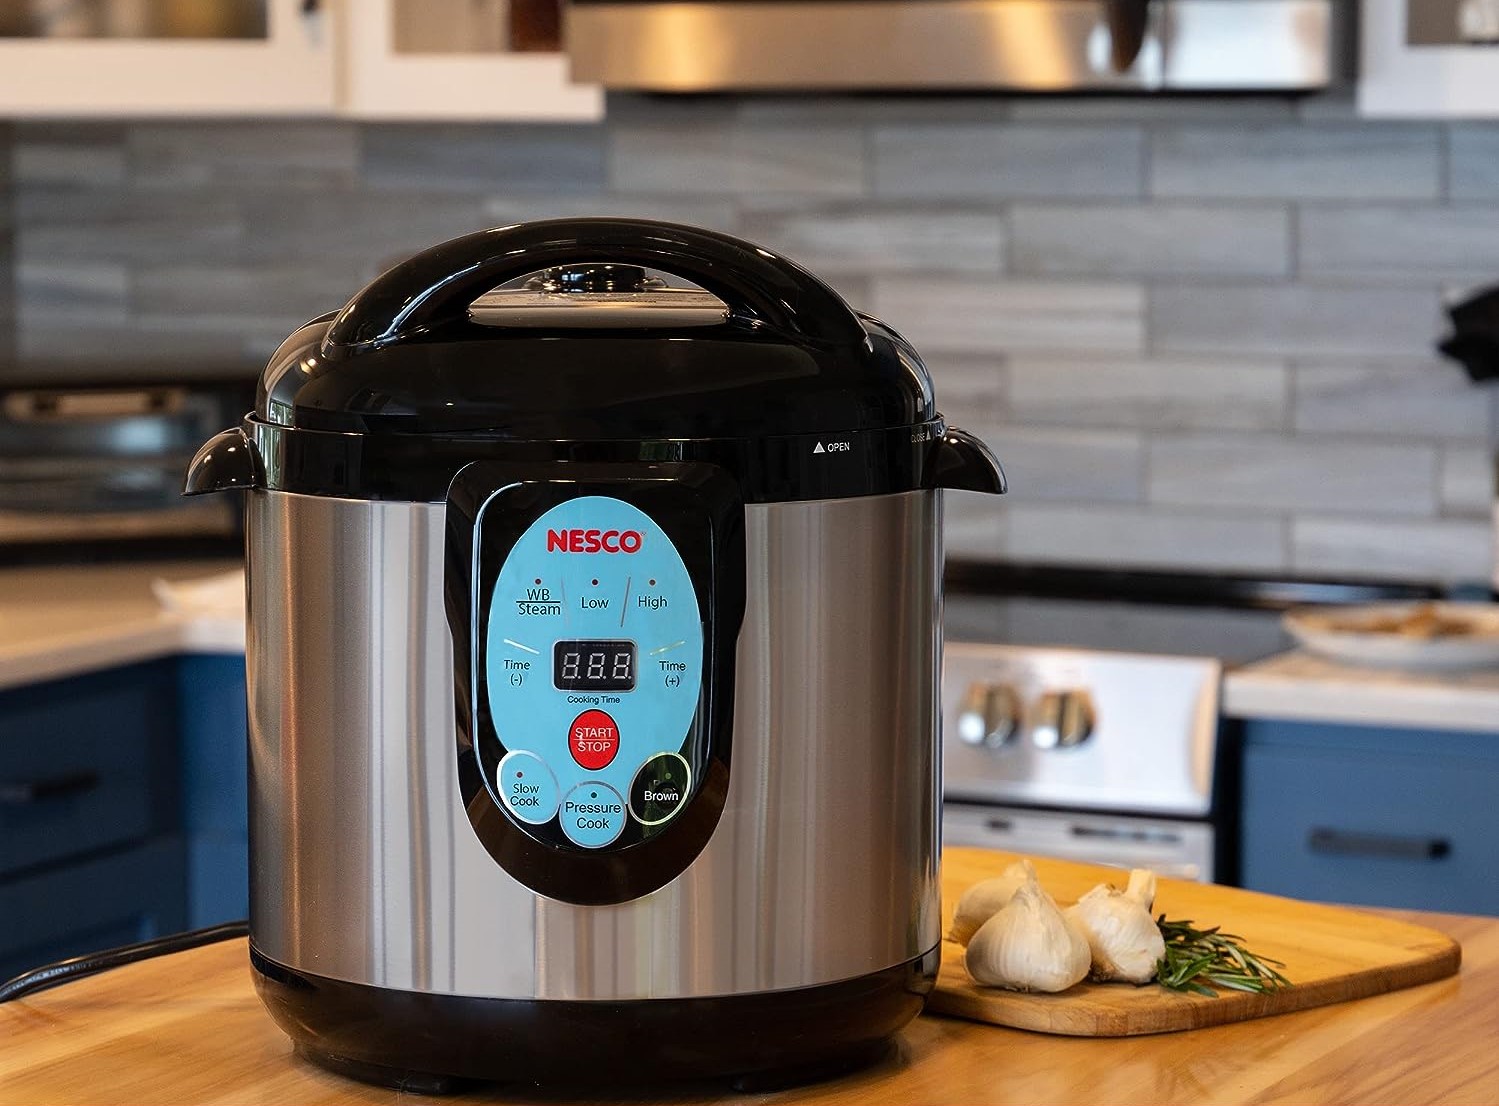 NutriPot NuWave Pressure Cooker Review - Pressure Cooking Today™